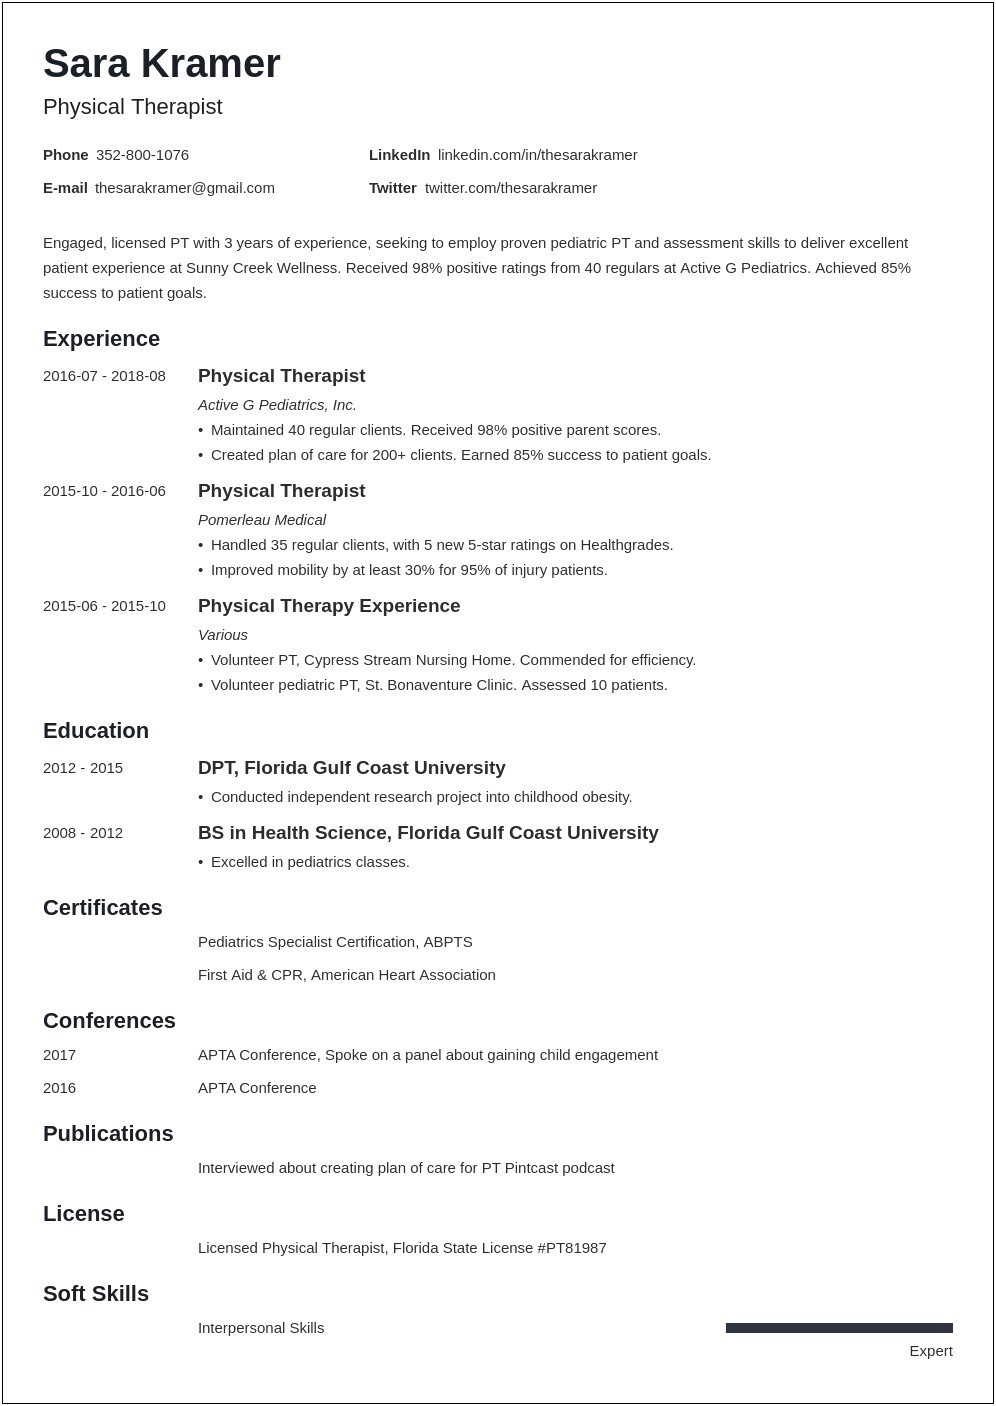 Sample Resumes For Physical Therapist Assistant Student